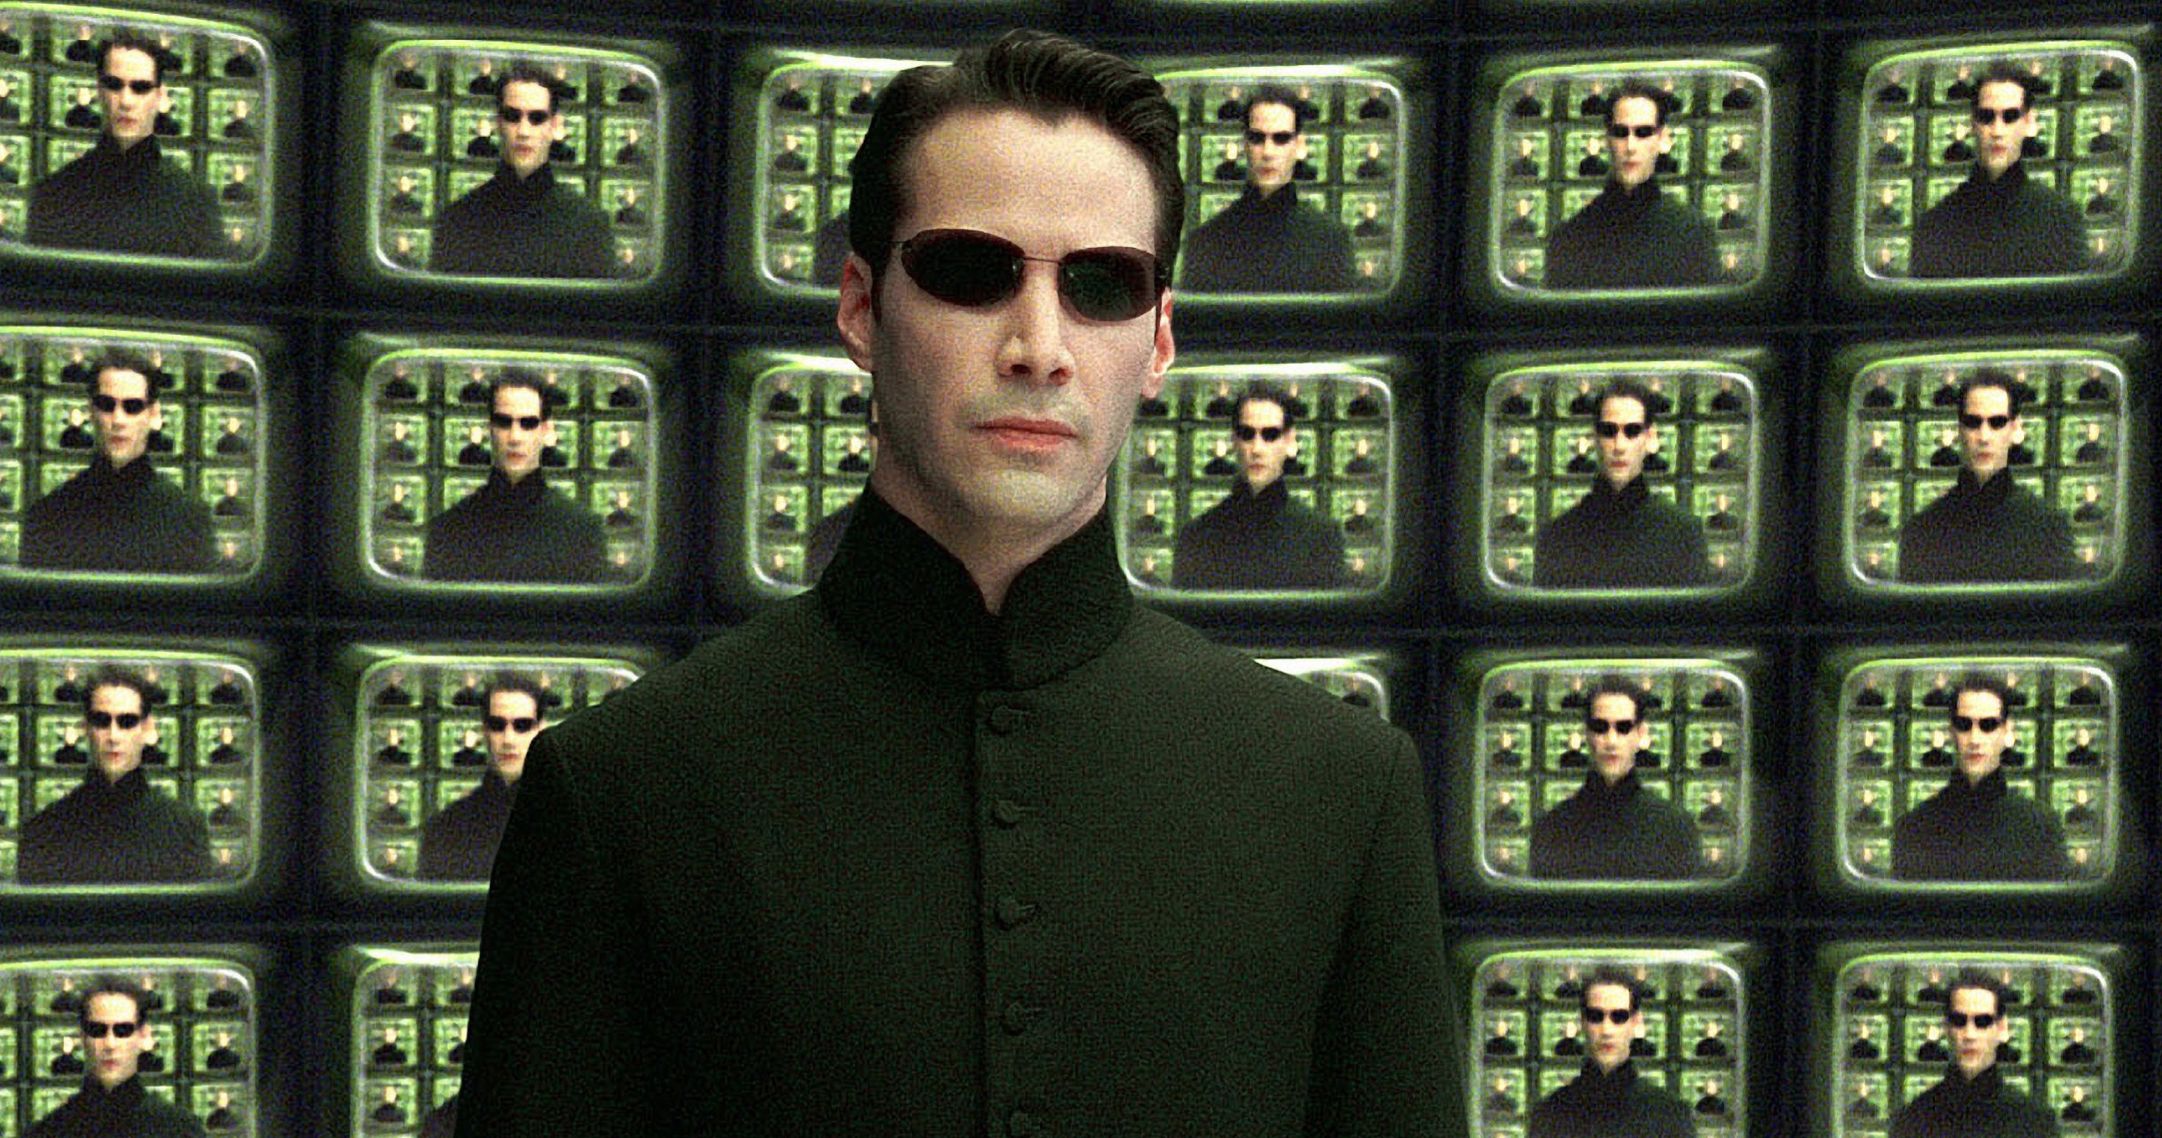 The Matrix 4 Director Is Adamant About an Exclusive Theatrical Launch Ahead of HBO Max Debut